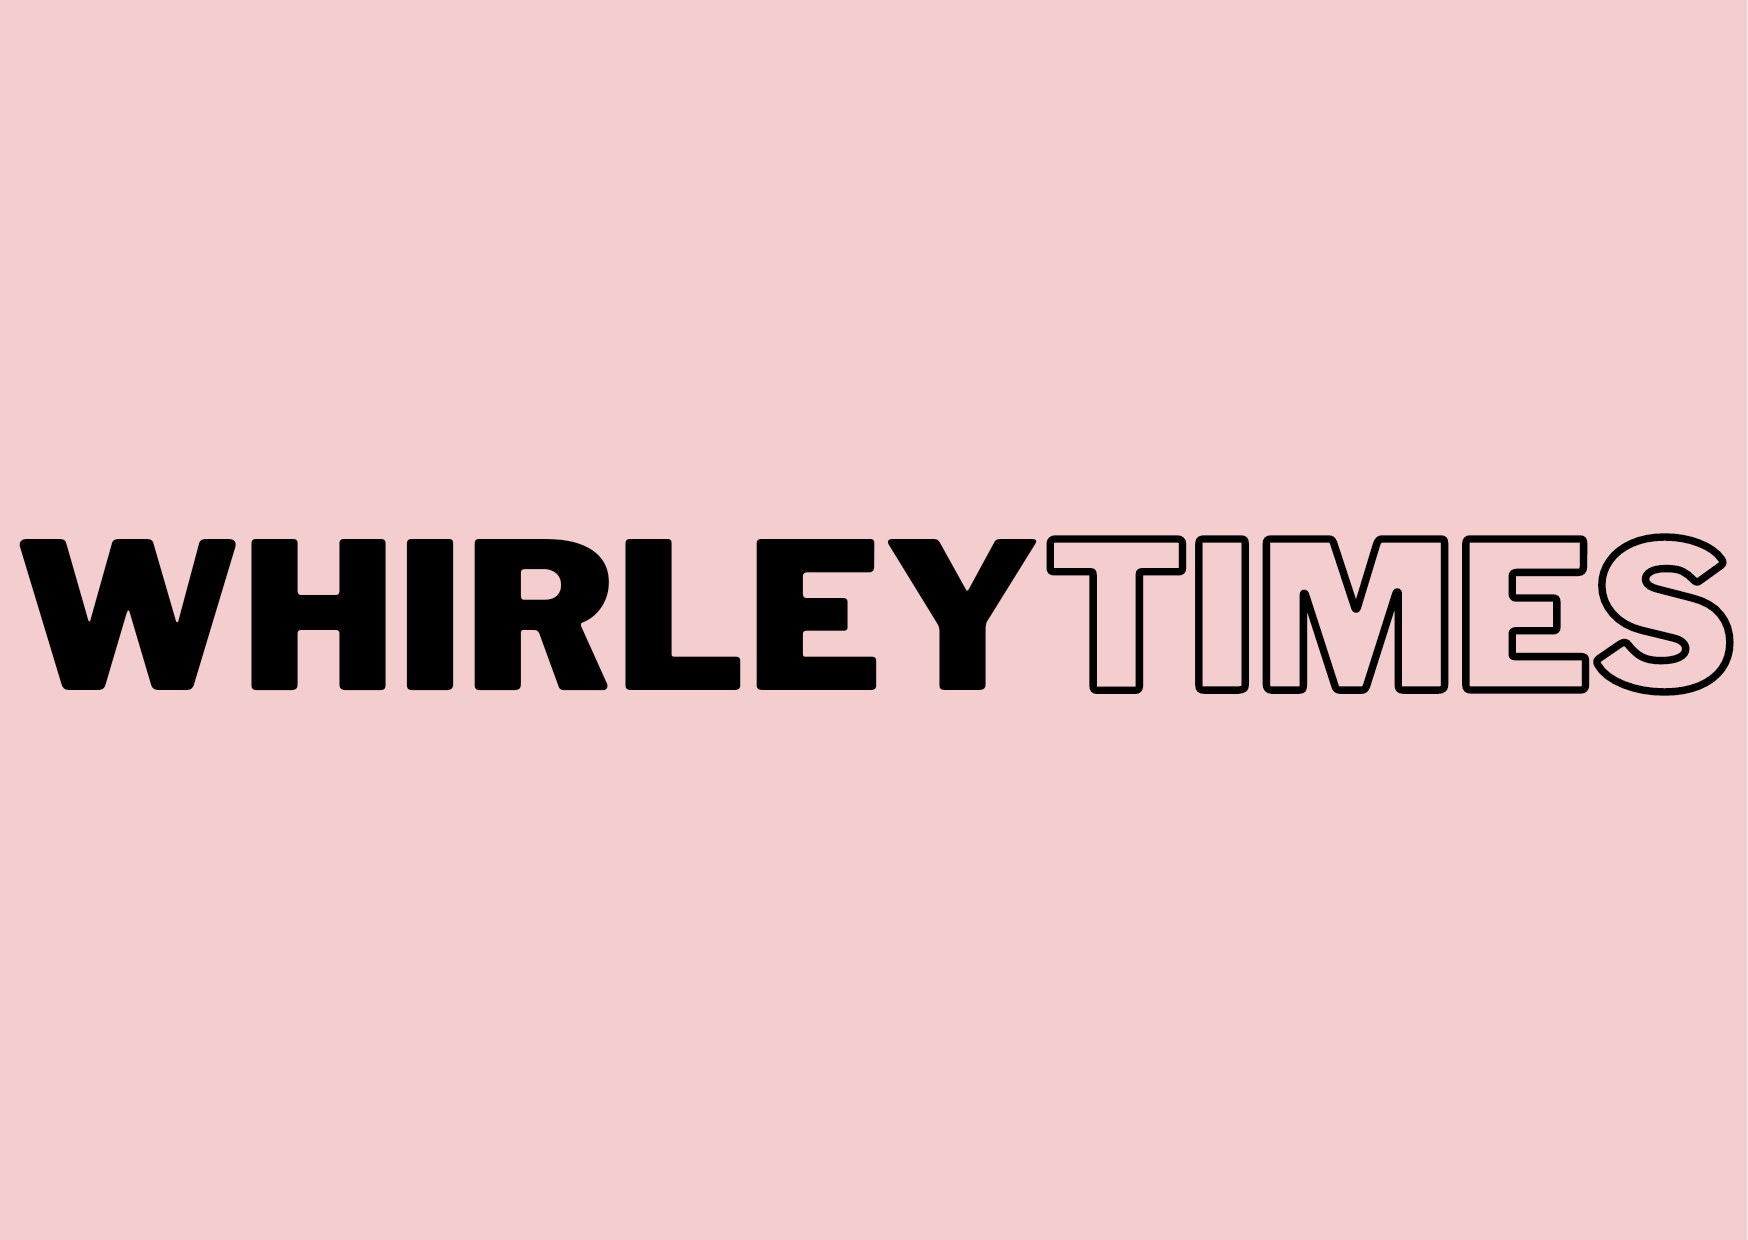 WHIRLEY TIMES